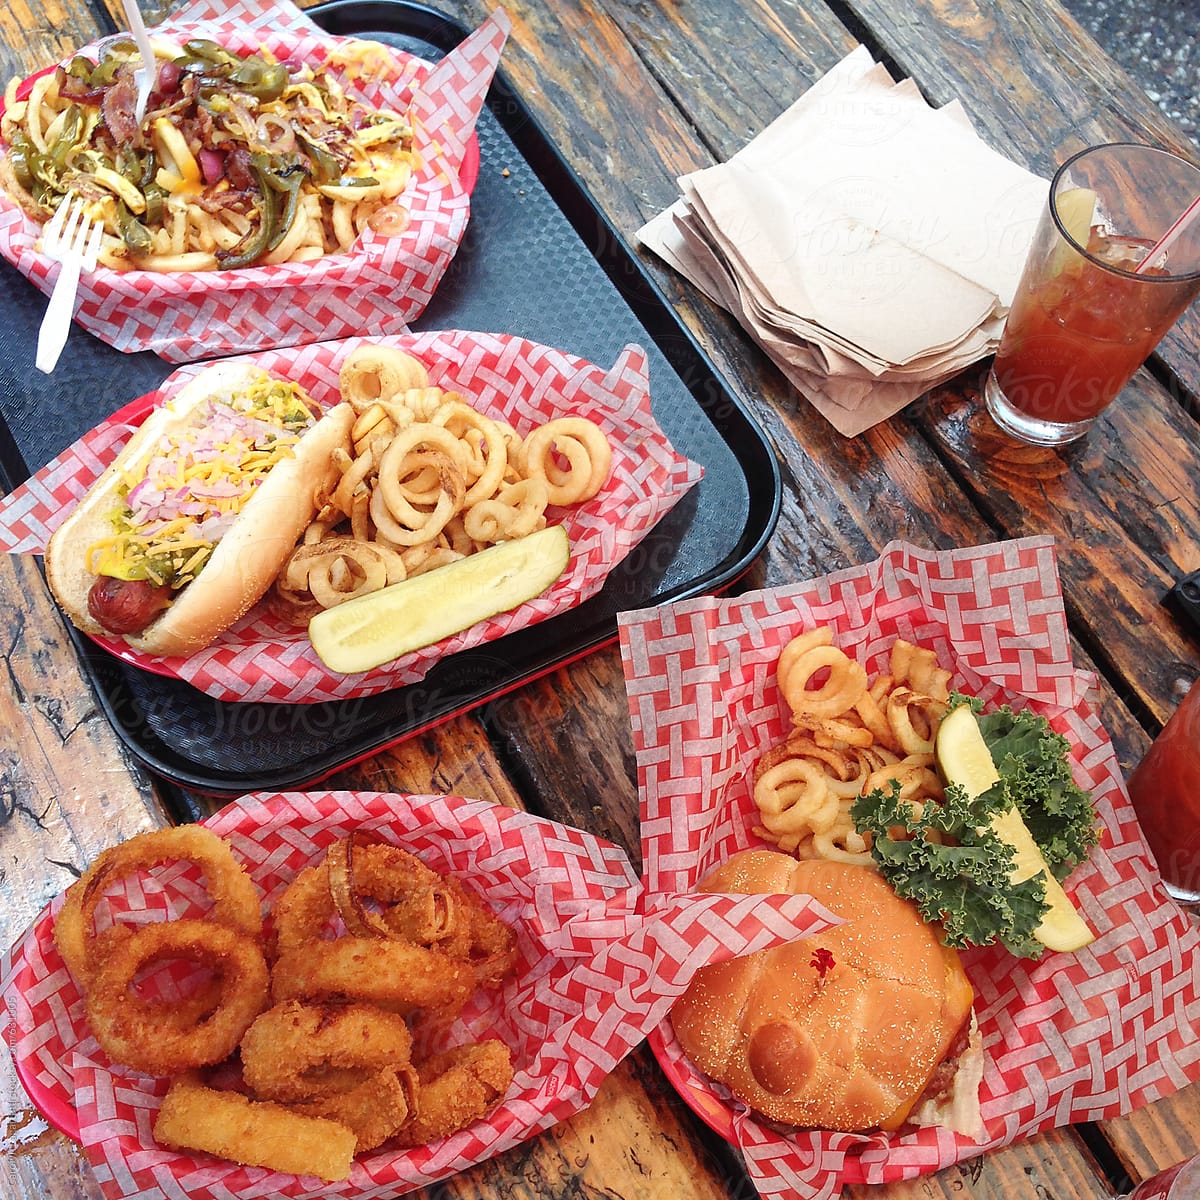 Table with onion rings, hot dogs, hamburgers and other delicious American foods